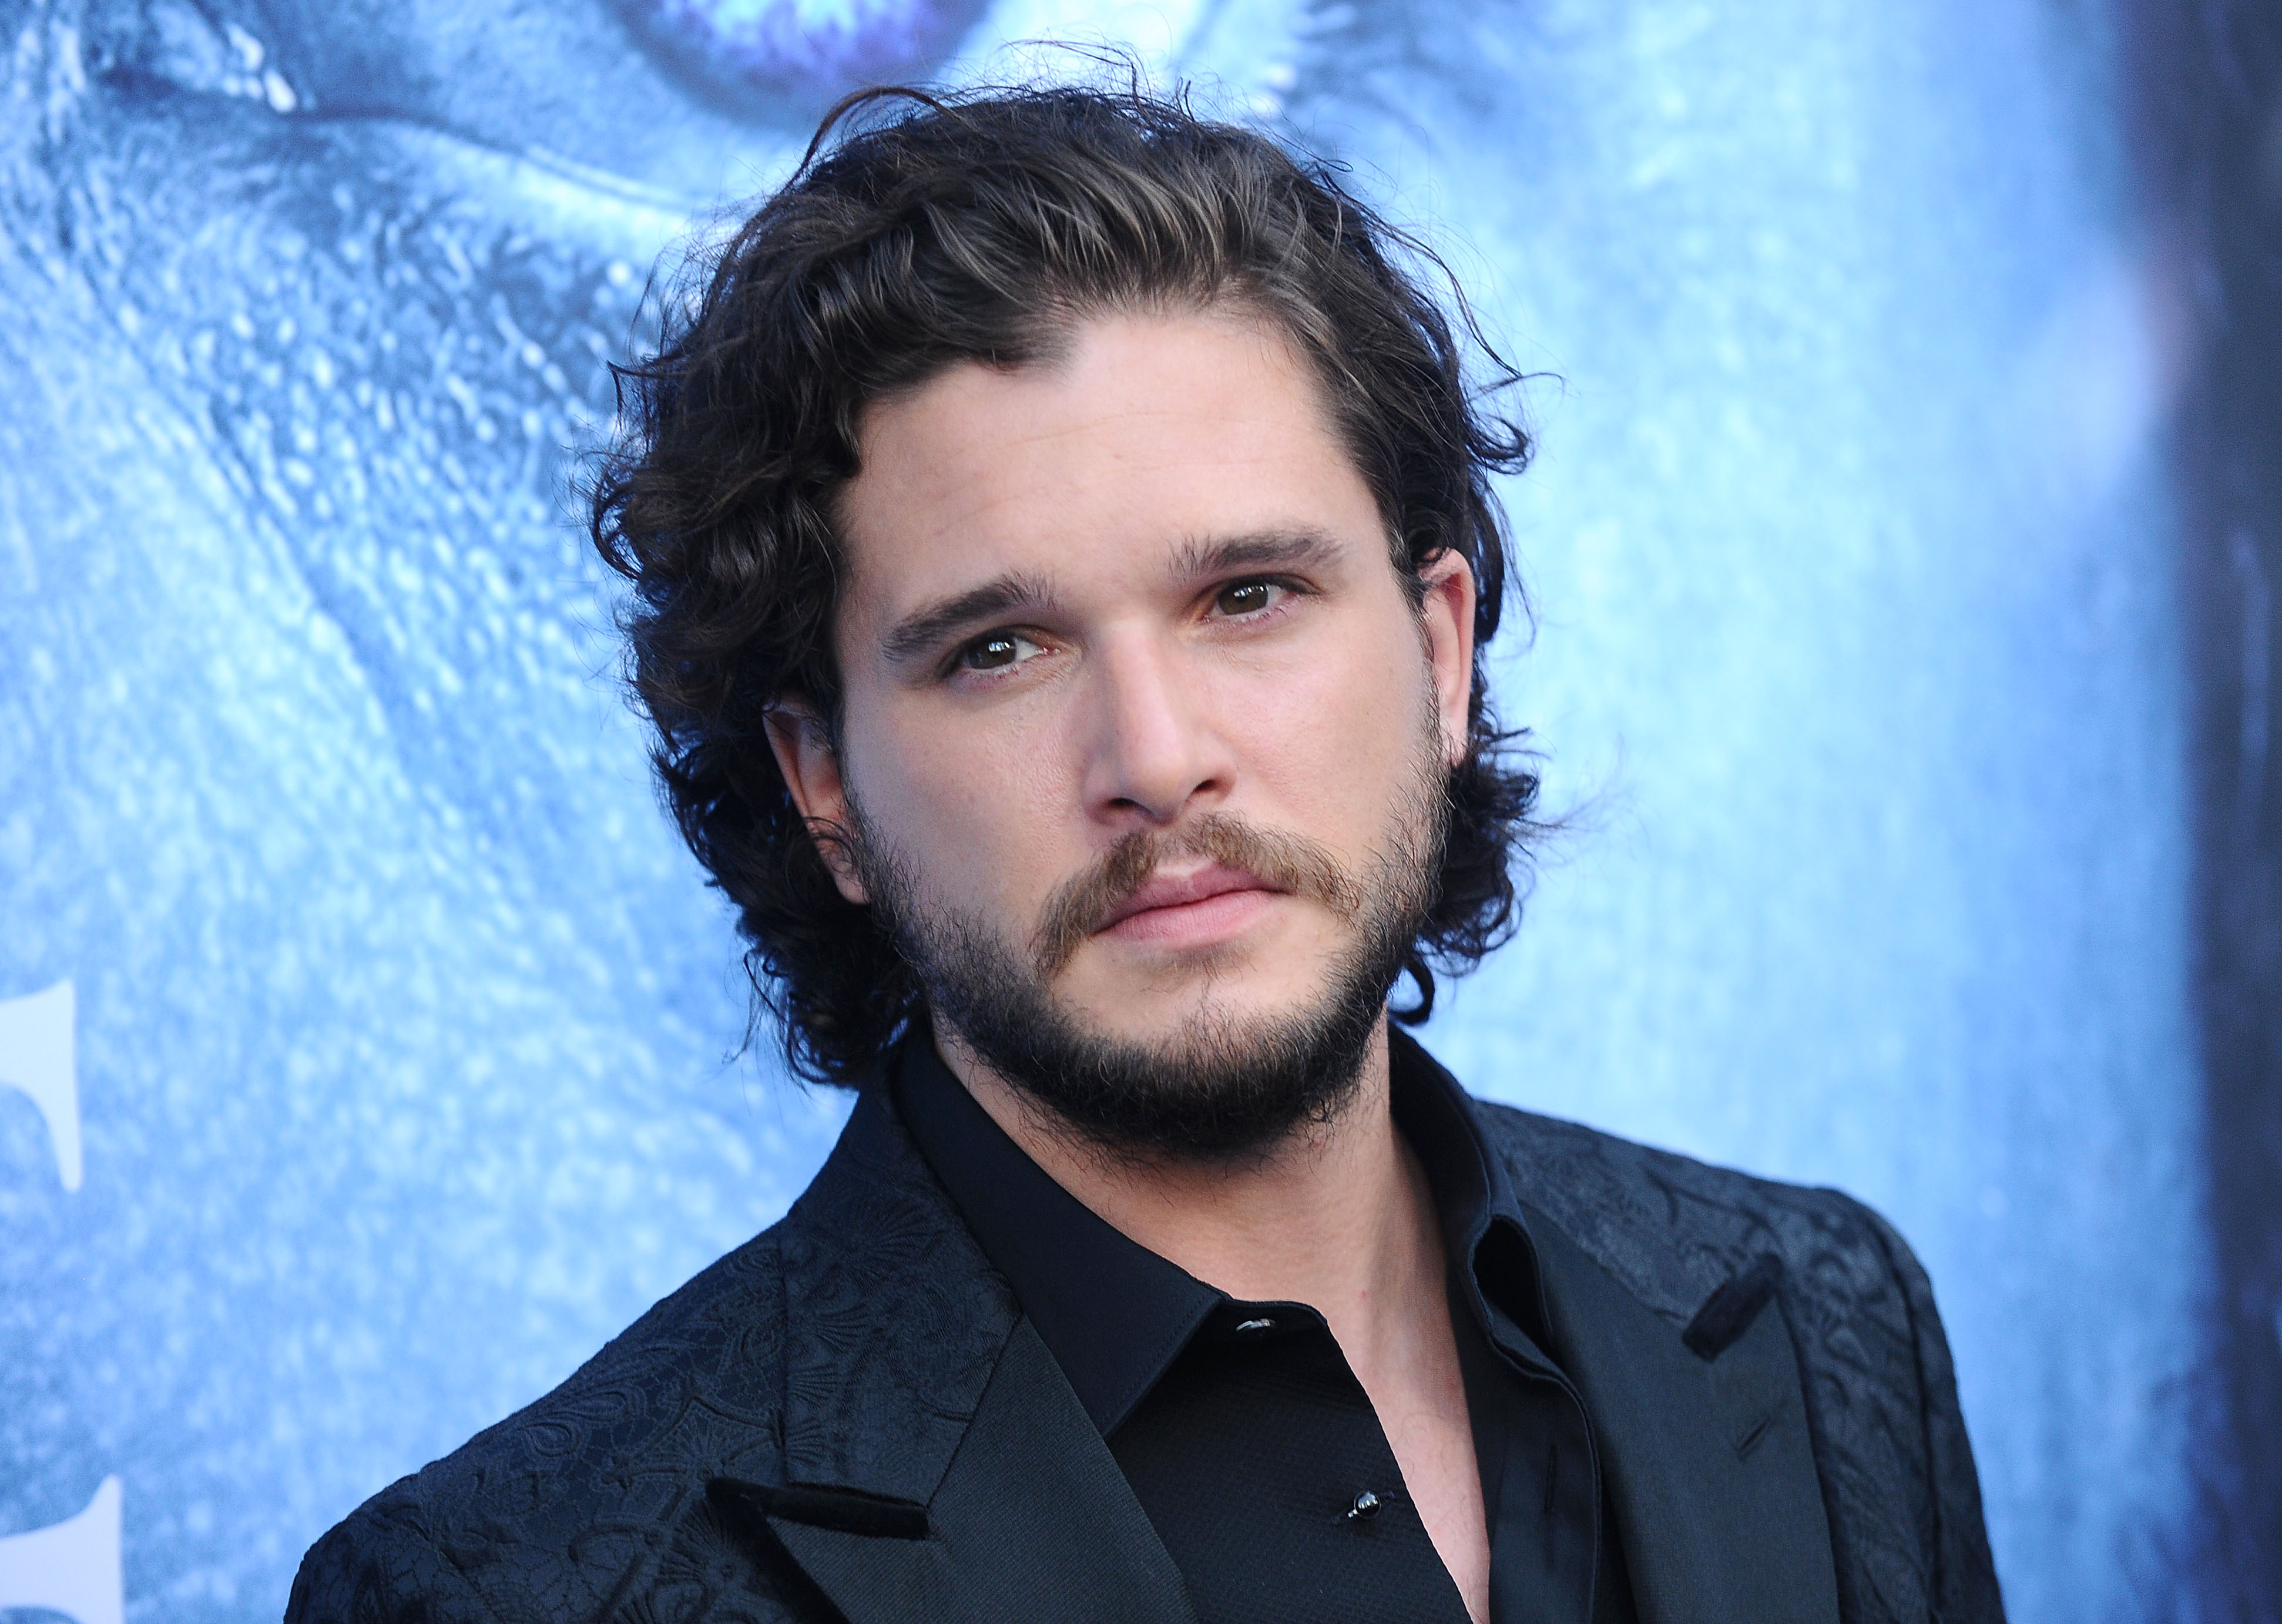 Actor Kit Harington attends the season 7 premiere of "Game Of Thrones" at Walt Disney Concert Hall on July 12, 2017 in Los Angeles, Calif. (Jason LaVeris&mdash;FilmMagic/Getty Images)